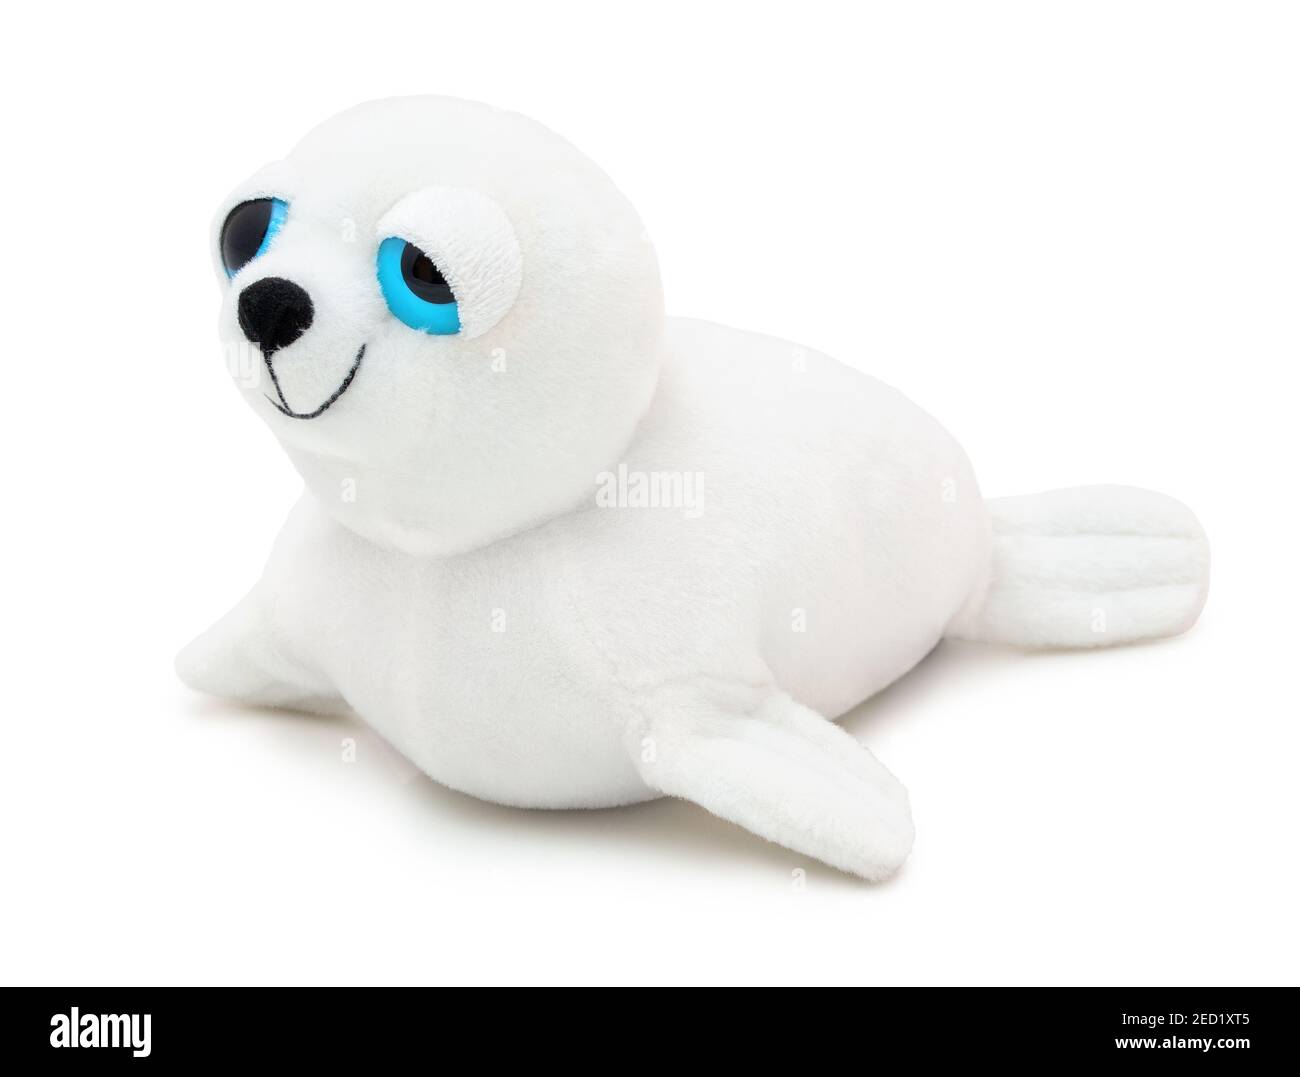 Cute seal doll with big blue eyes isolated on white background with shadow. Playful seal on white underlay. Plush stuffed puppet toy for children. Pla Stock Photo